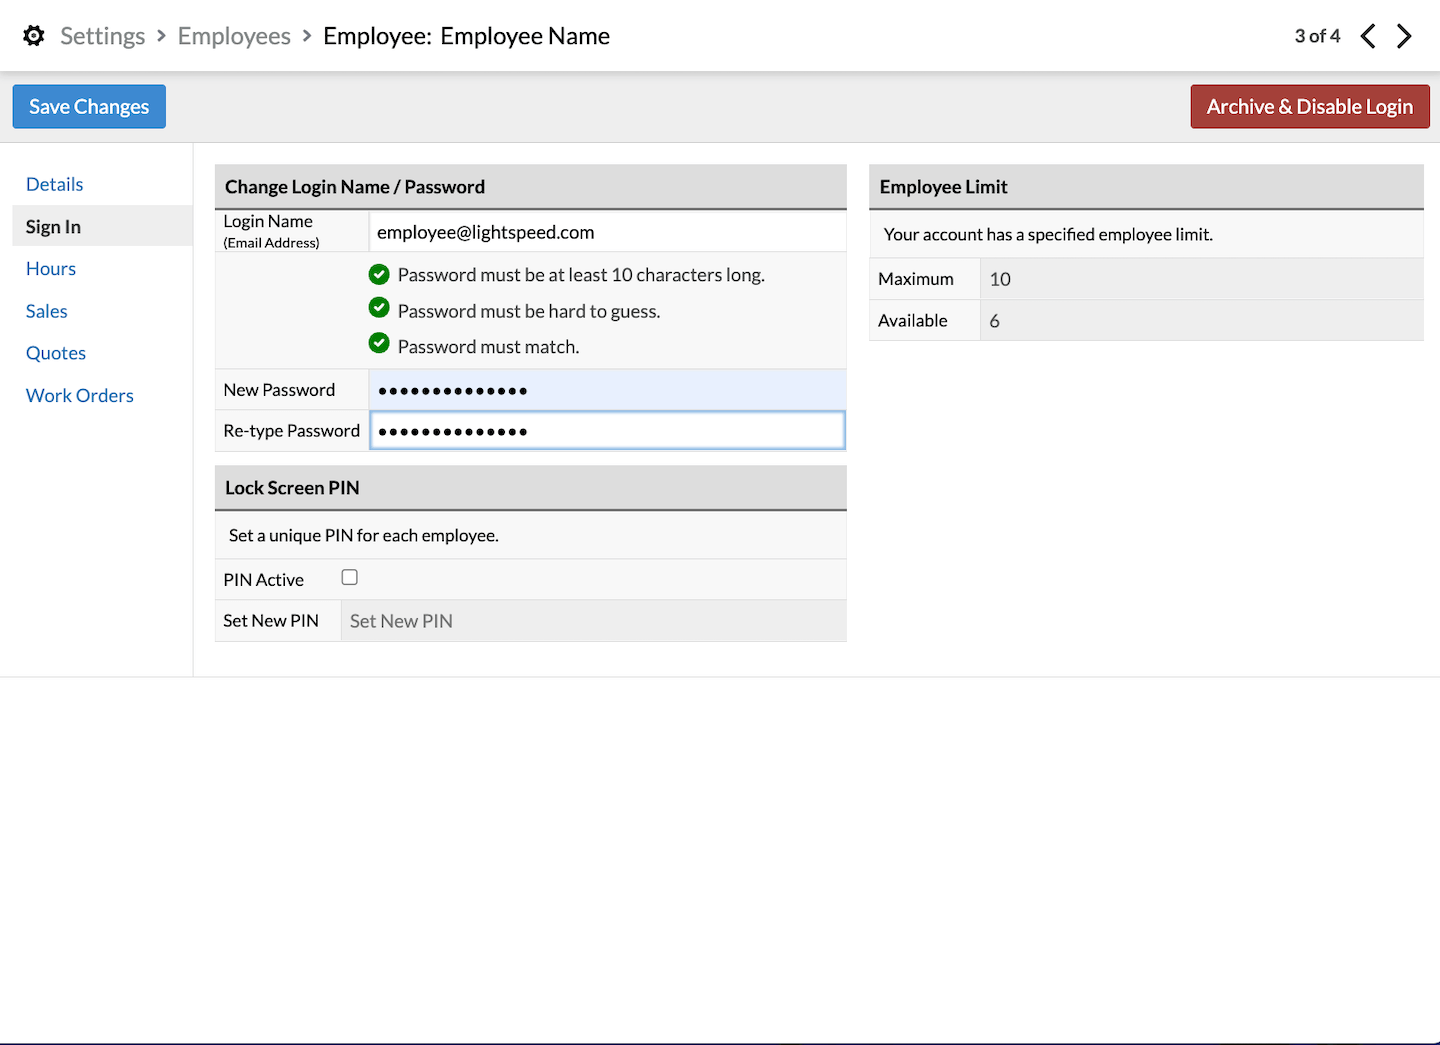 Sign In page with Login section filled out and Save Changes button visible.